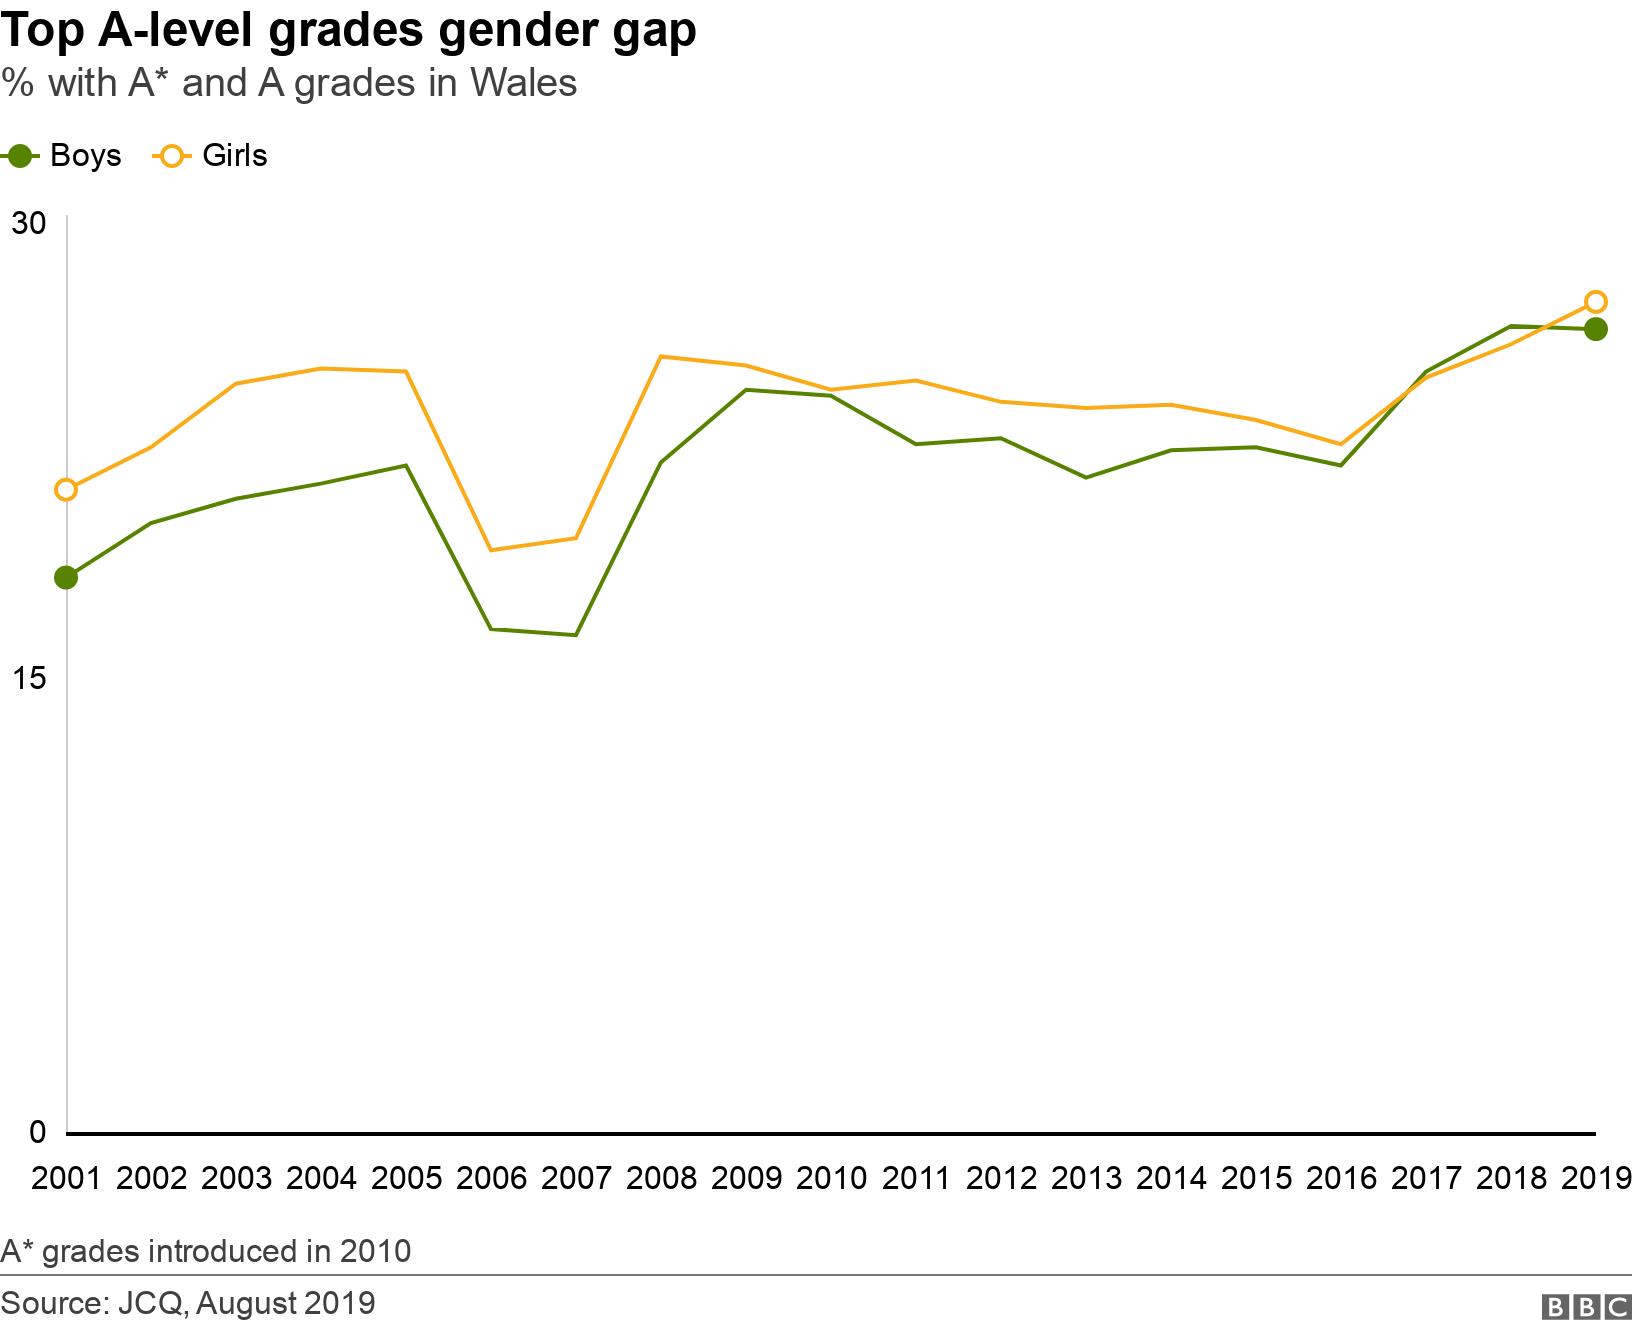 Top A-level grades gender gap. % with A* and A grades in Wales. Gender performance at top A-level grades in Wals A* grades introduced in 2010.